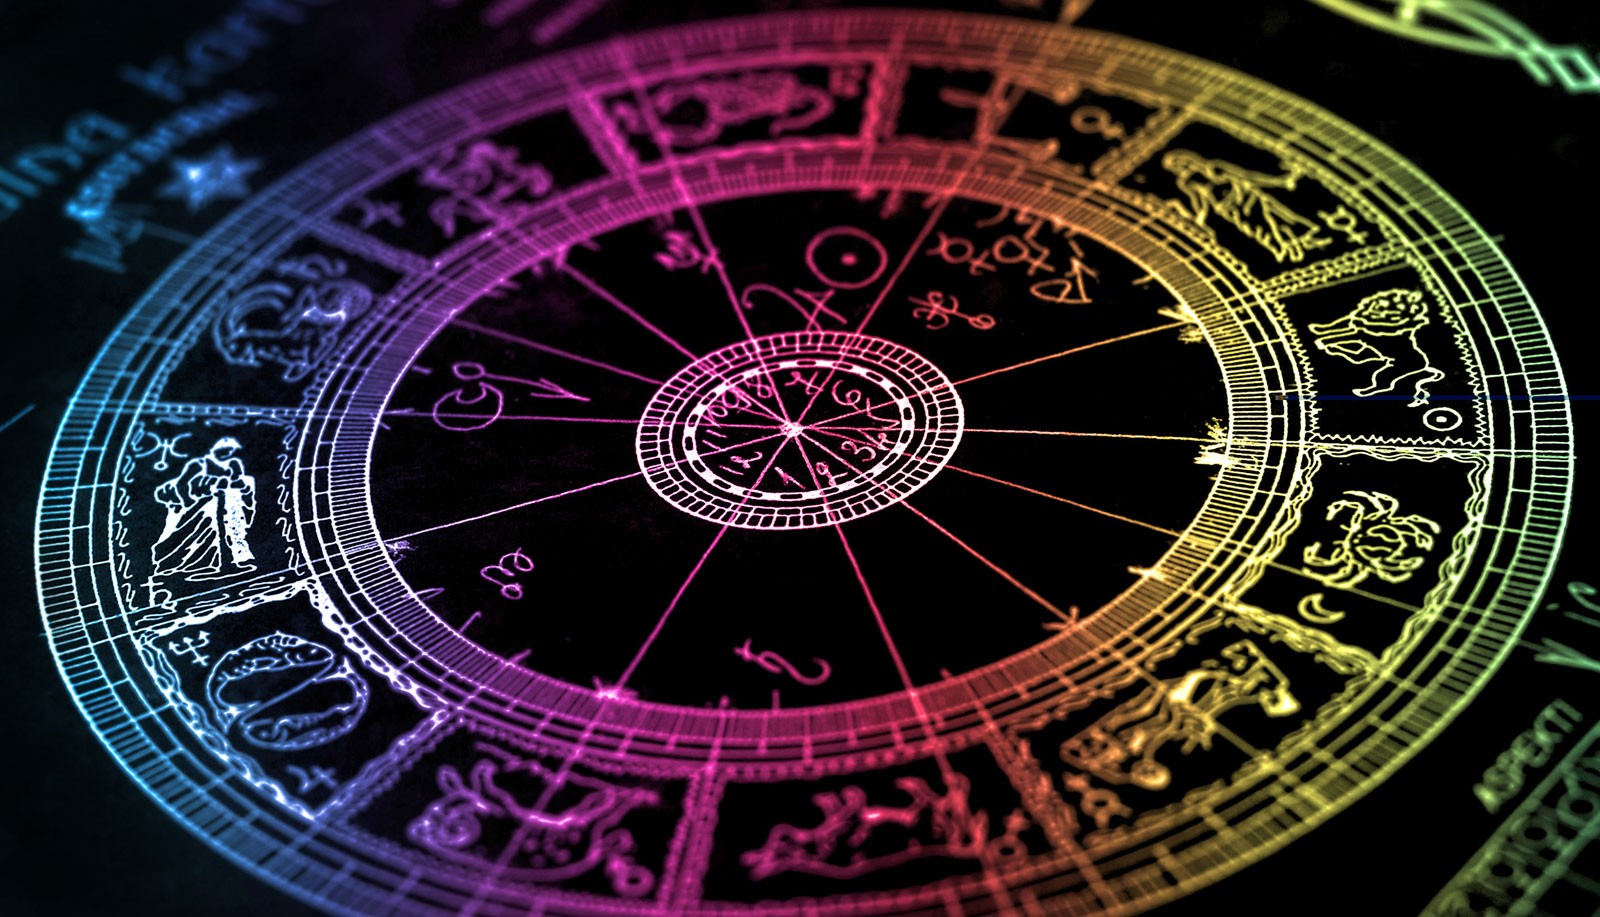 what does my name mean in astrology